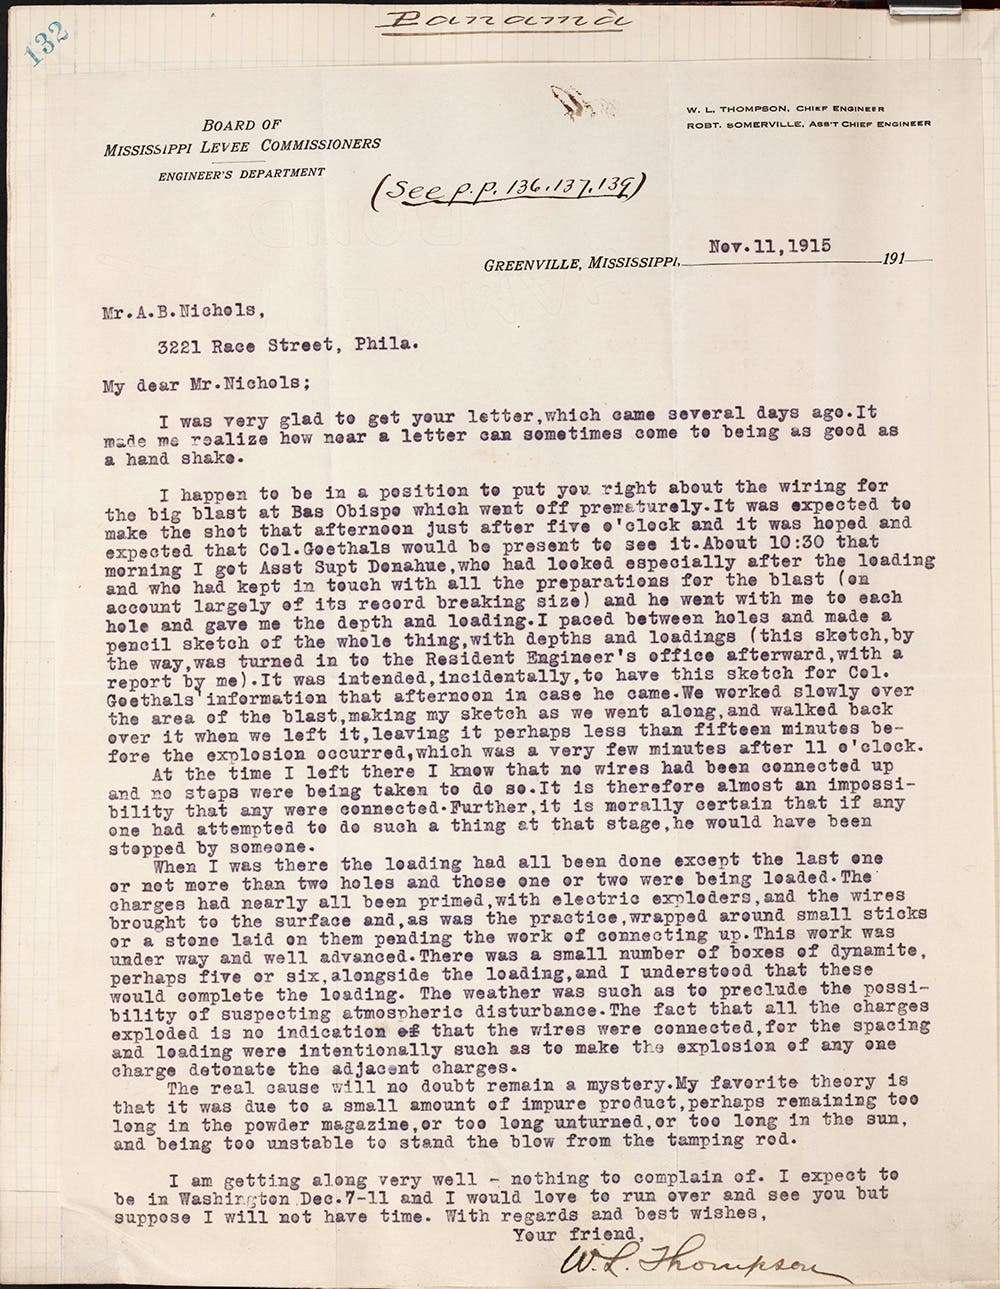 Letter to A.B. Nichols from W.L. Thompson, the engineer who had inspected the preparations for the Bas Obispo blast.
Nichols continued to try to investigate the cause of the blast after he retired to Philadelphia in October 1915. In November, he received a letter from W.L. Thompson, one of the engineers involved in setting up the explosives, clarifying that at the time of the blast the 